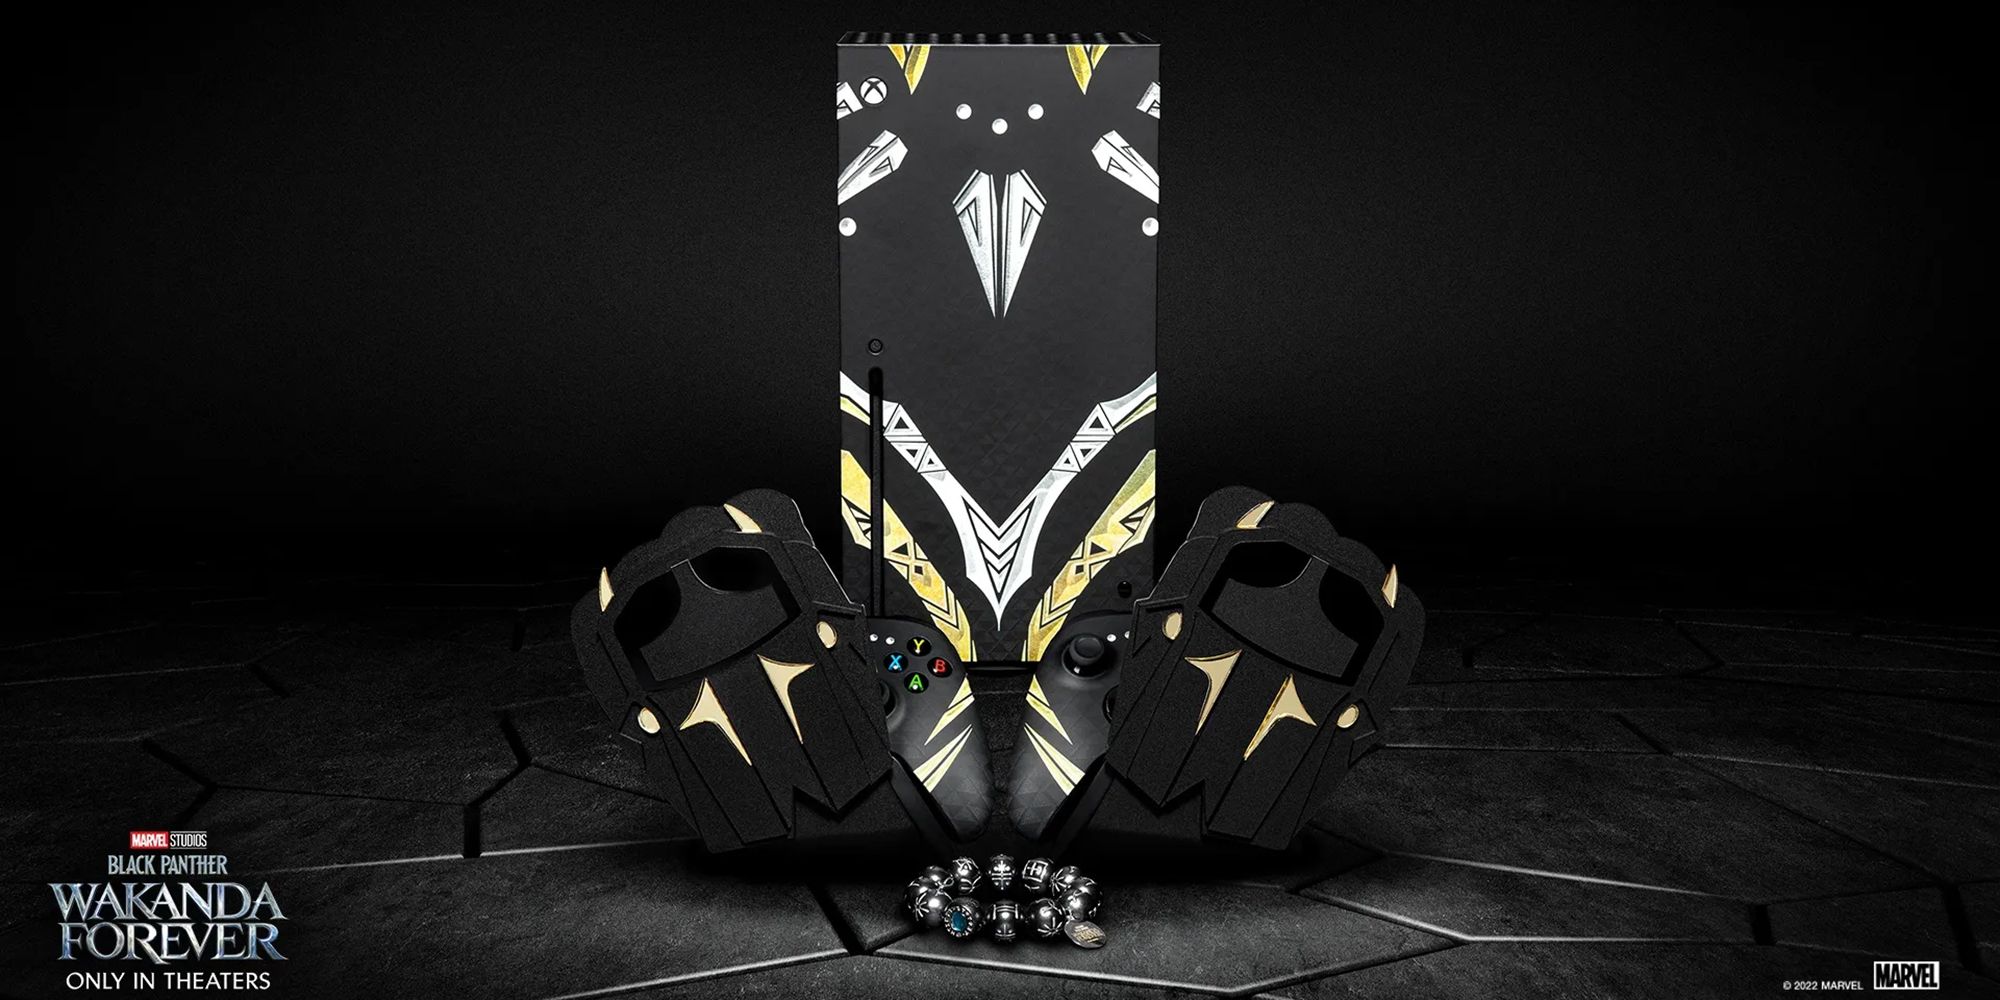 black panther wakanda forever xbox series x featuring two controllers and set of beads